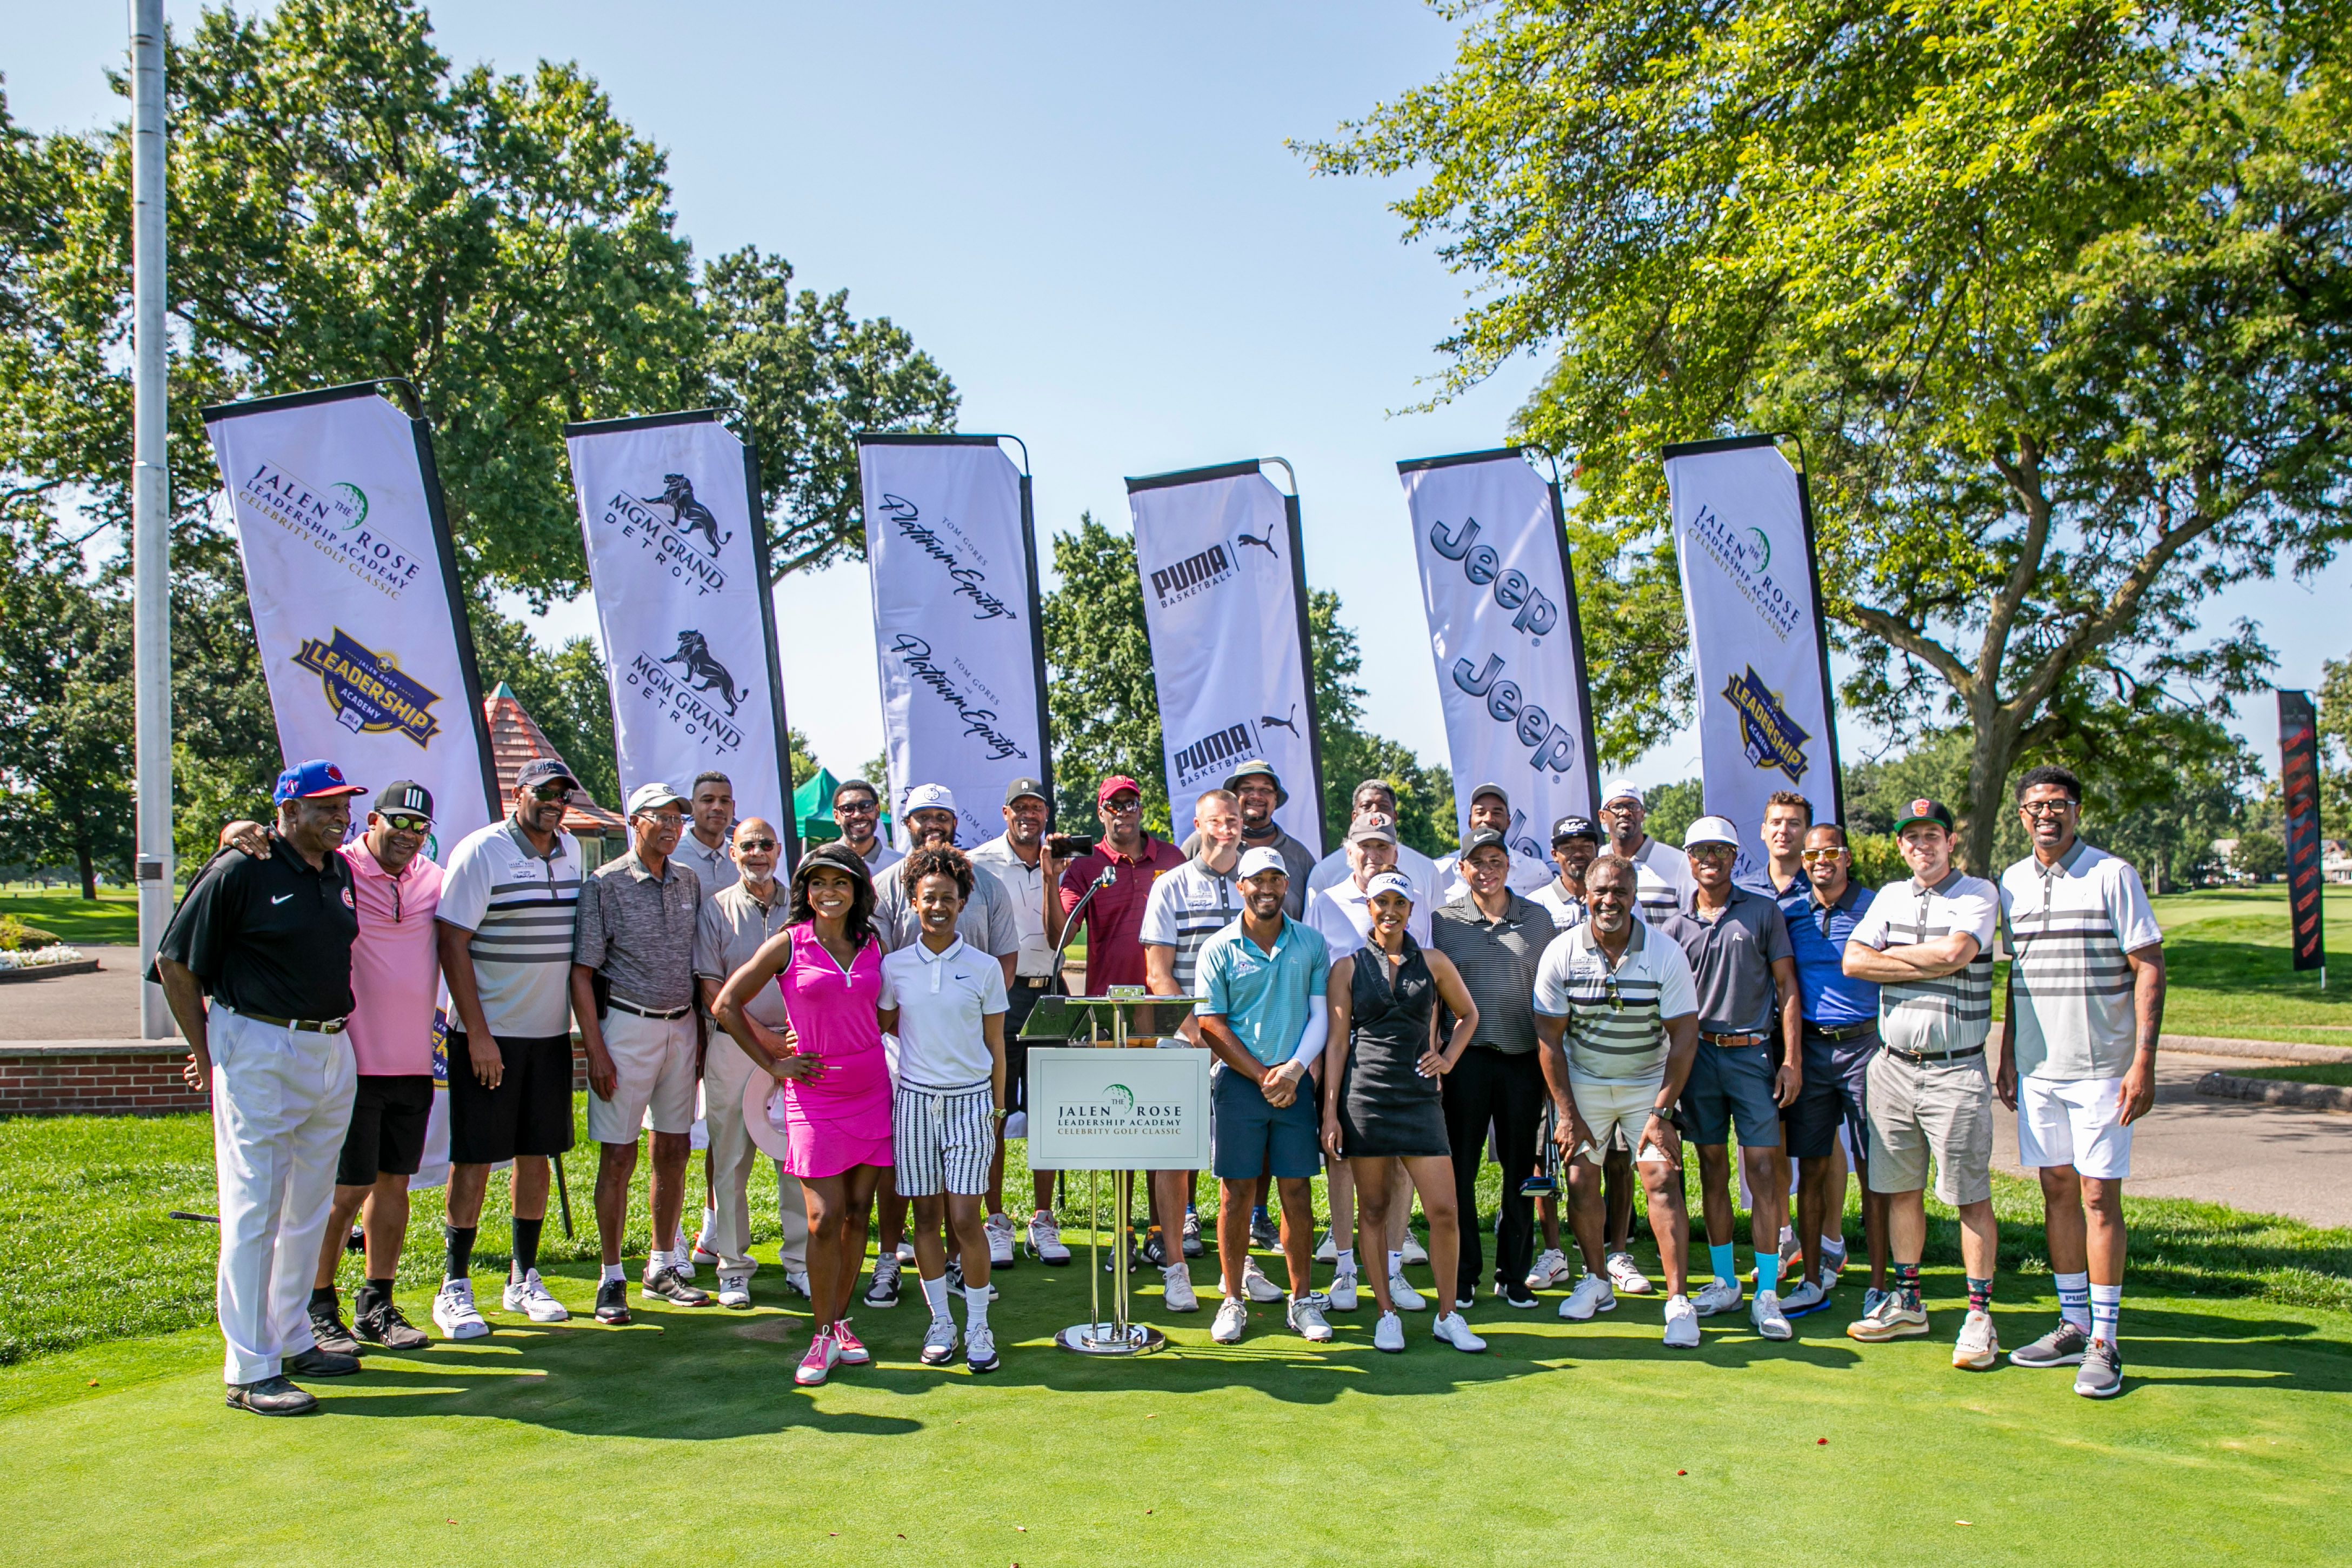 Participating celebrities at the 11th annual Jalen Rose Golf Classic, A PGD Global Production, pose for a photo at the opening ceremonies on the putting green at Detroit Golf Club.